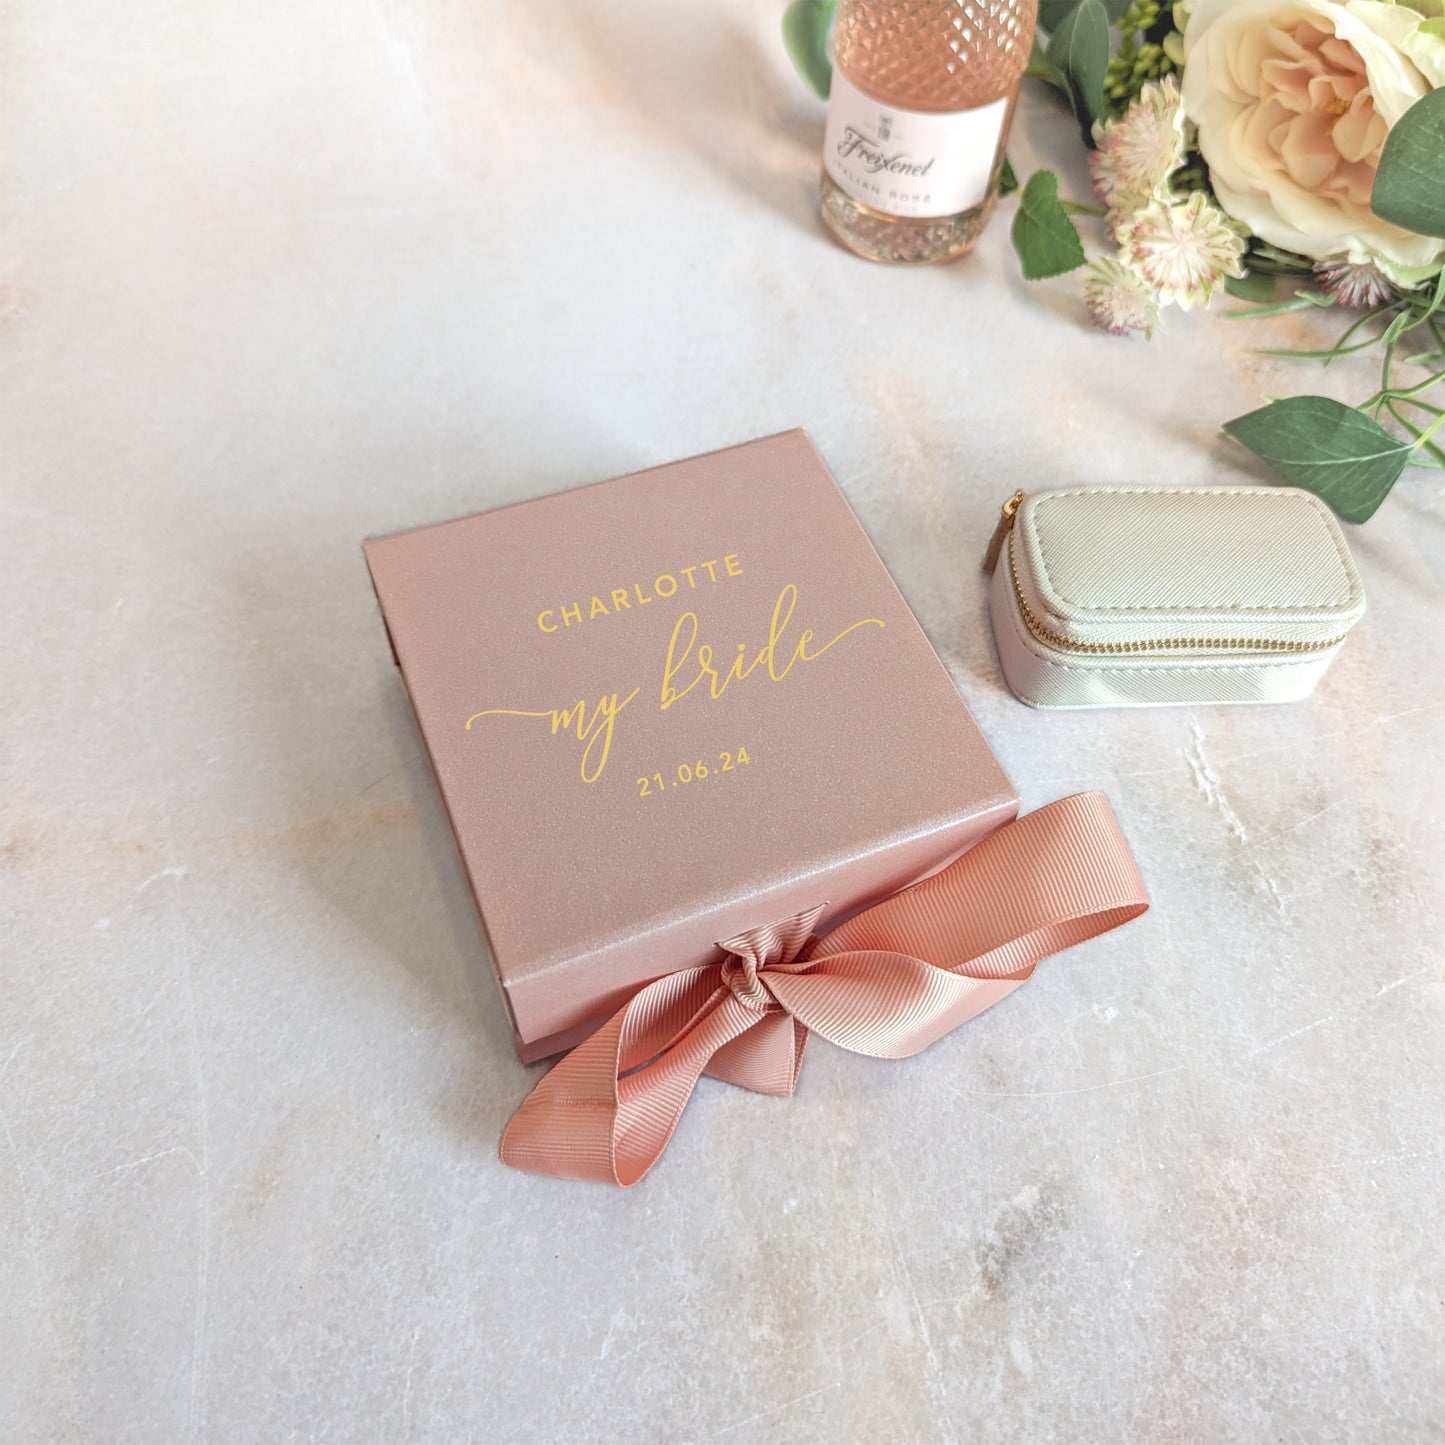 My Bride Gift Box - Small - Personalised